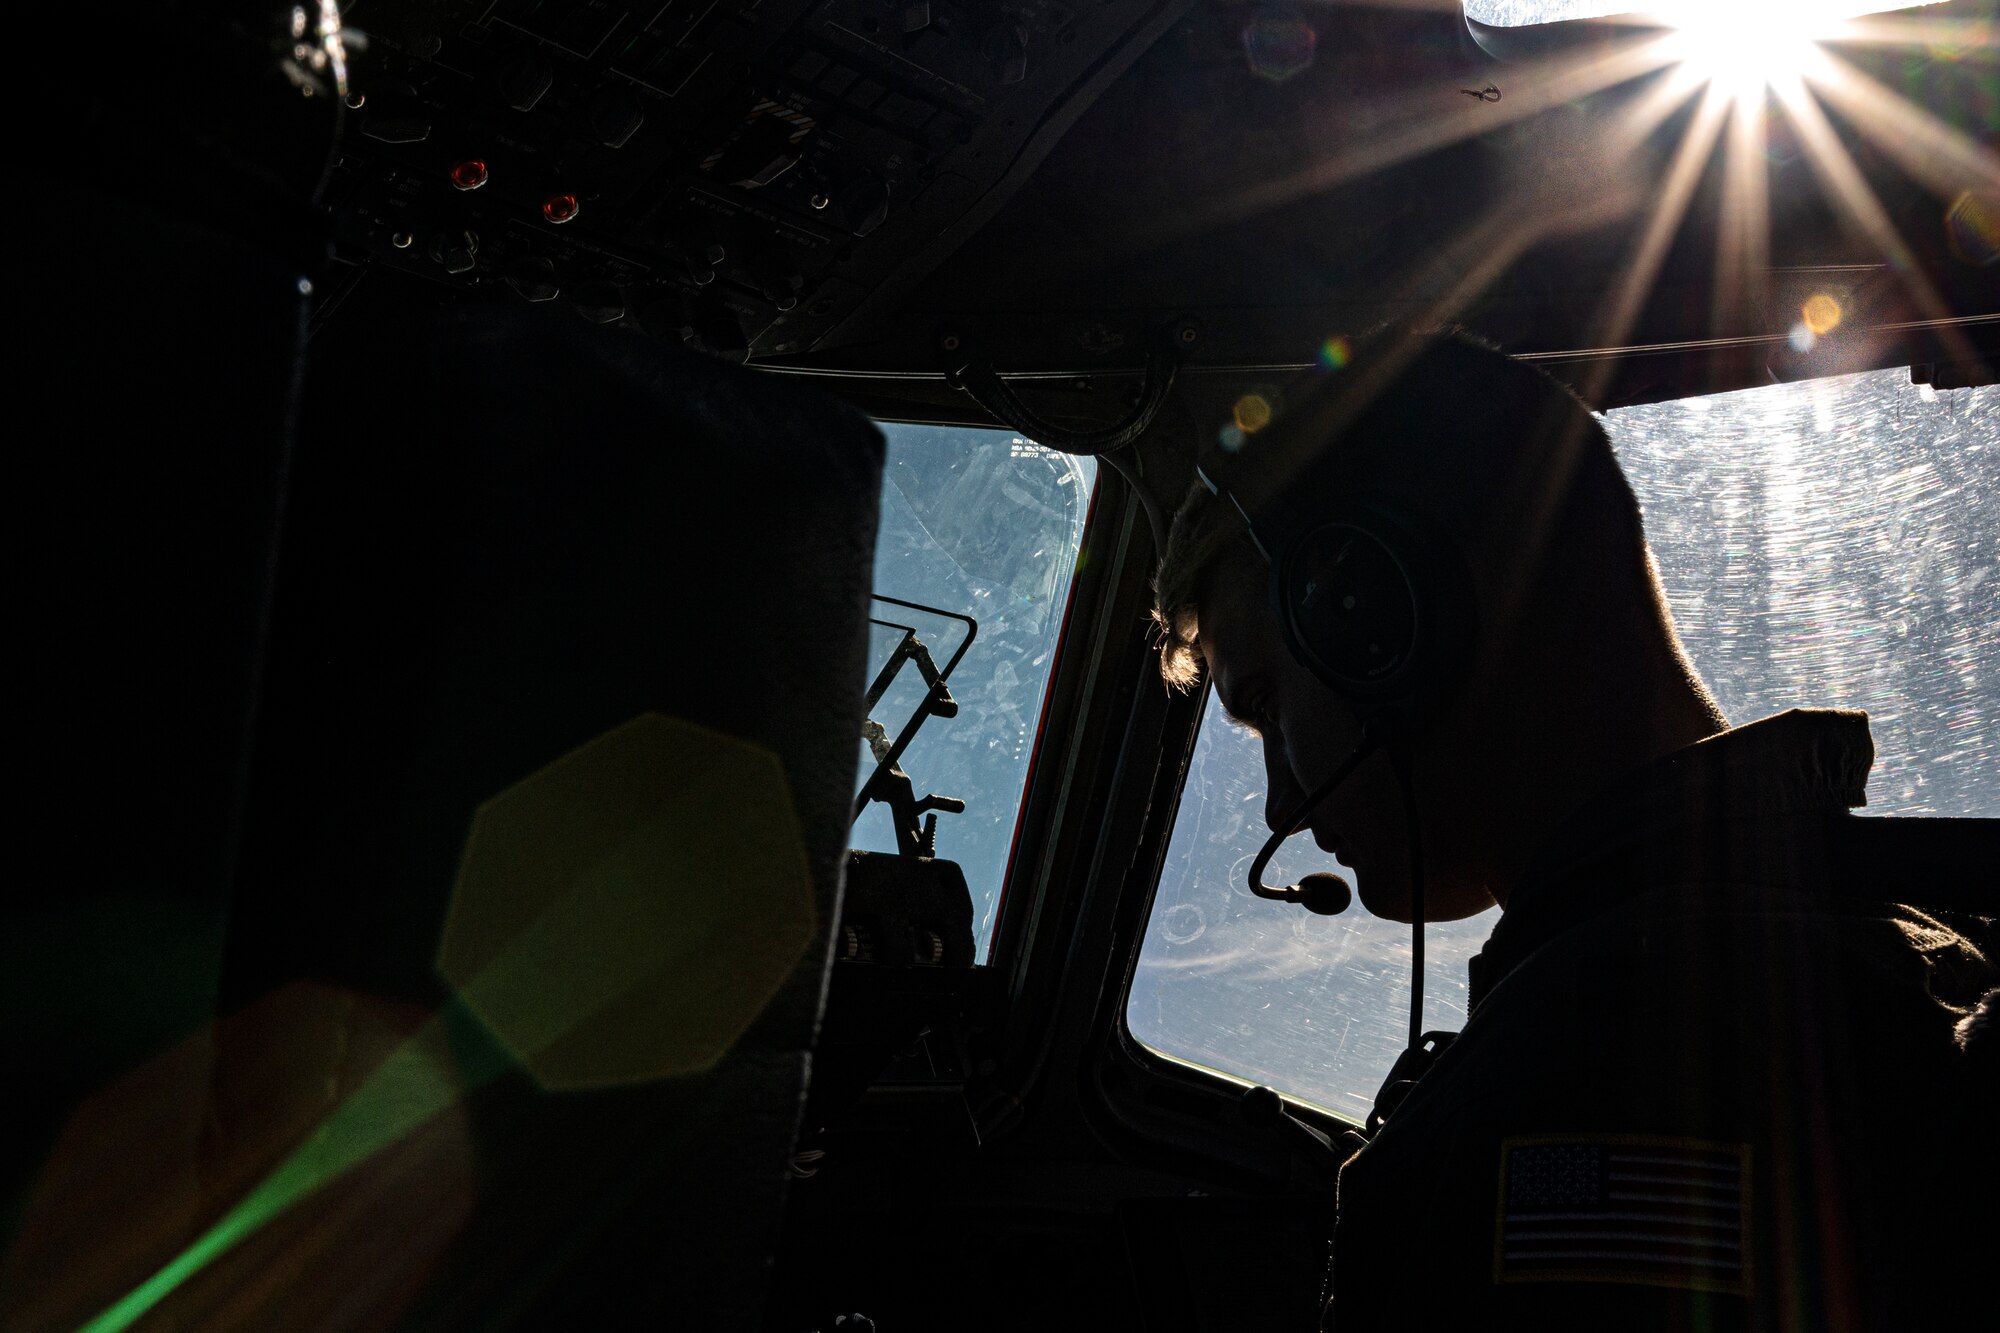 A U.S. Air Force C-17 Globemaster III pilot from Joint Base Elmendorf-Richardson, Alaska, flies with U.S. Army Paratrooper on June 15, 2022 during RED FLAG-Alaska 22-2. Approximately 1,600 service members from three nations participate in flying, maintaining and supporting more than 70 aircraft from over 22 units during this iteration of exercise.  The C-17 Globemaster III is assigned to the 517th Airlift Squadron, JBER. (U.S. Air Force photo by Sheila deVera)